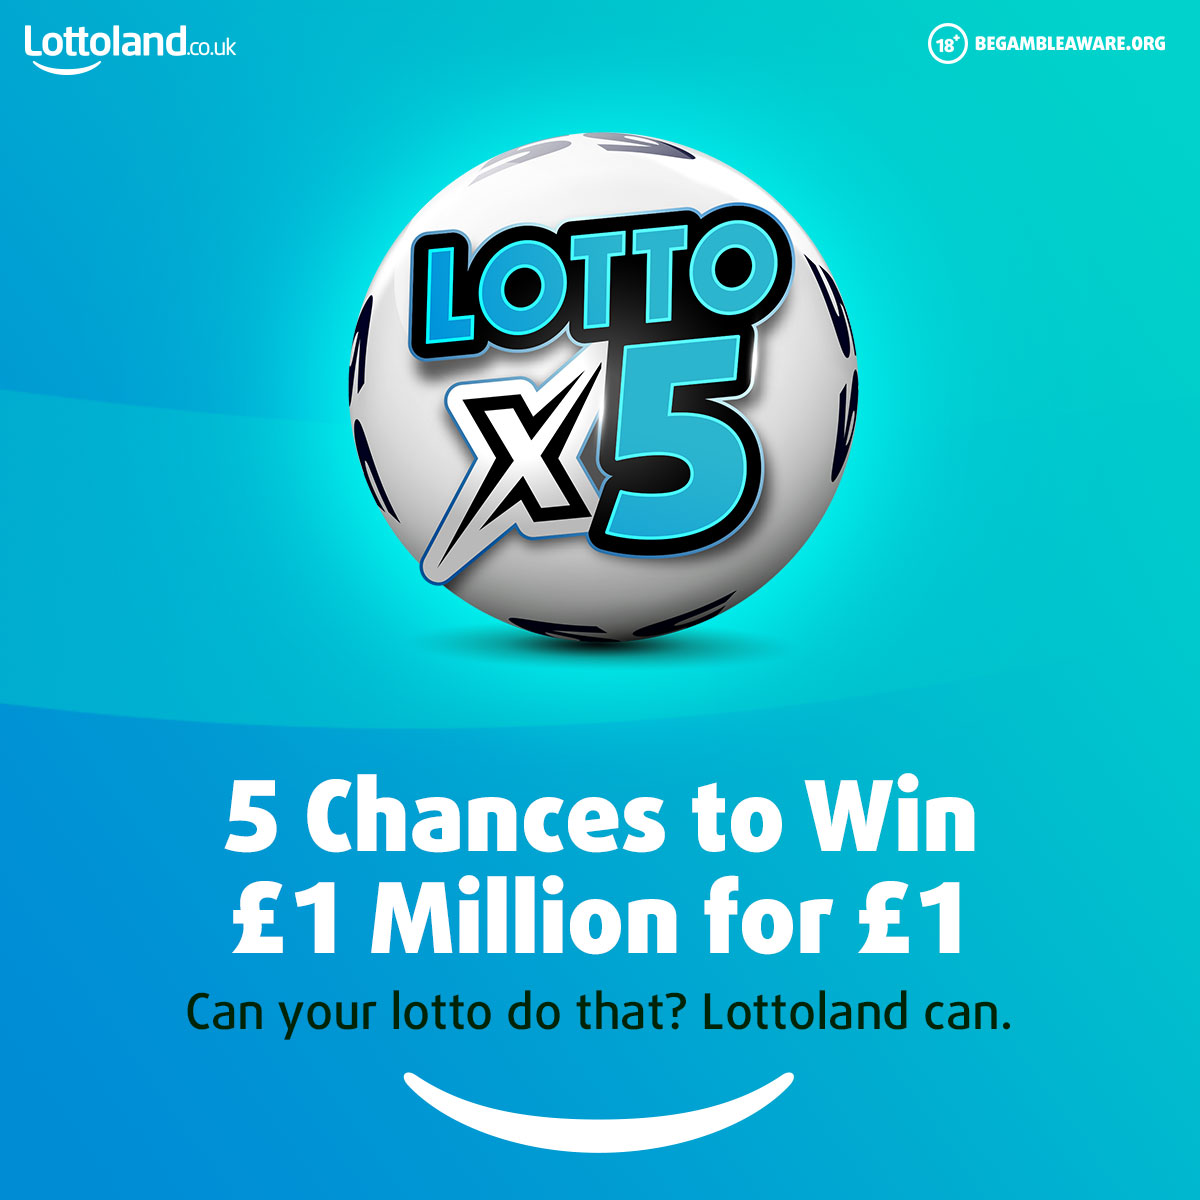 How would you spend one million? Lotto x5 has got Mancs asking the big question, The Manc